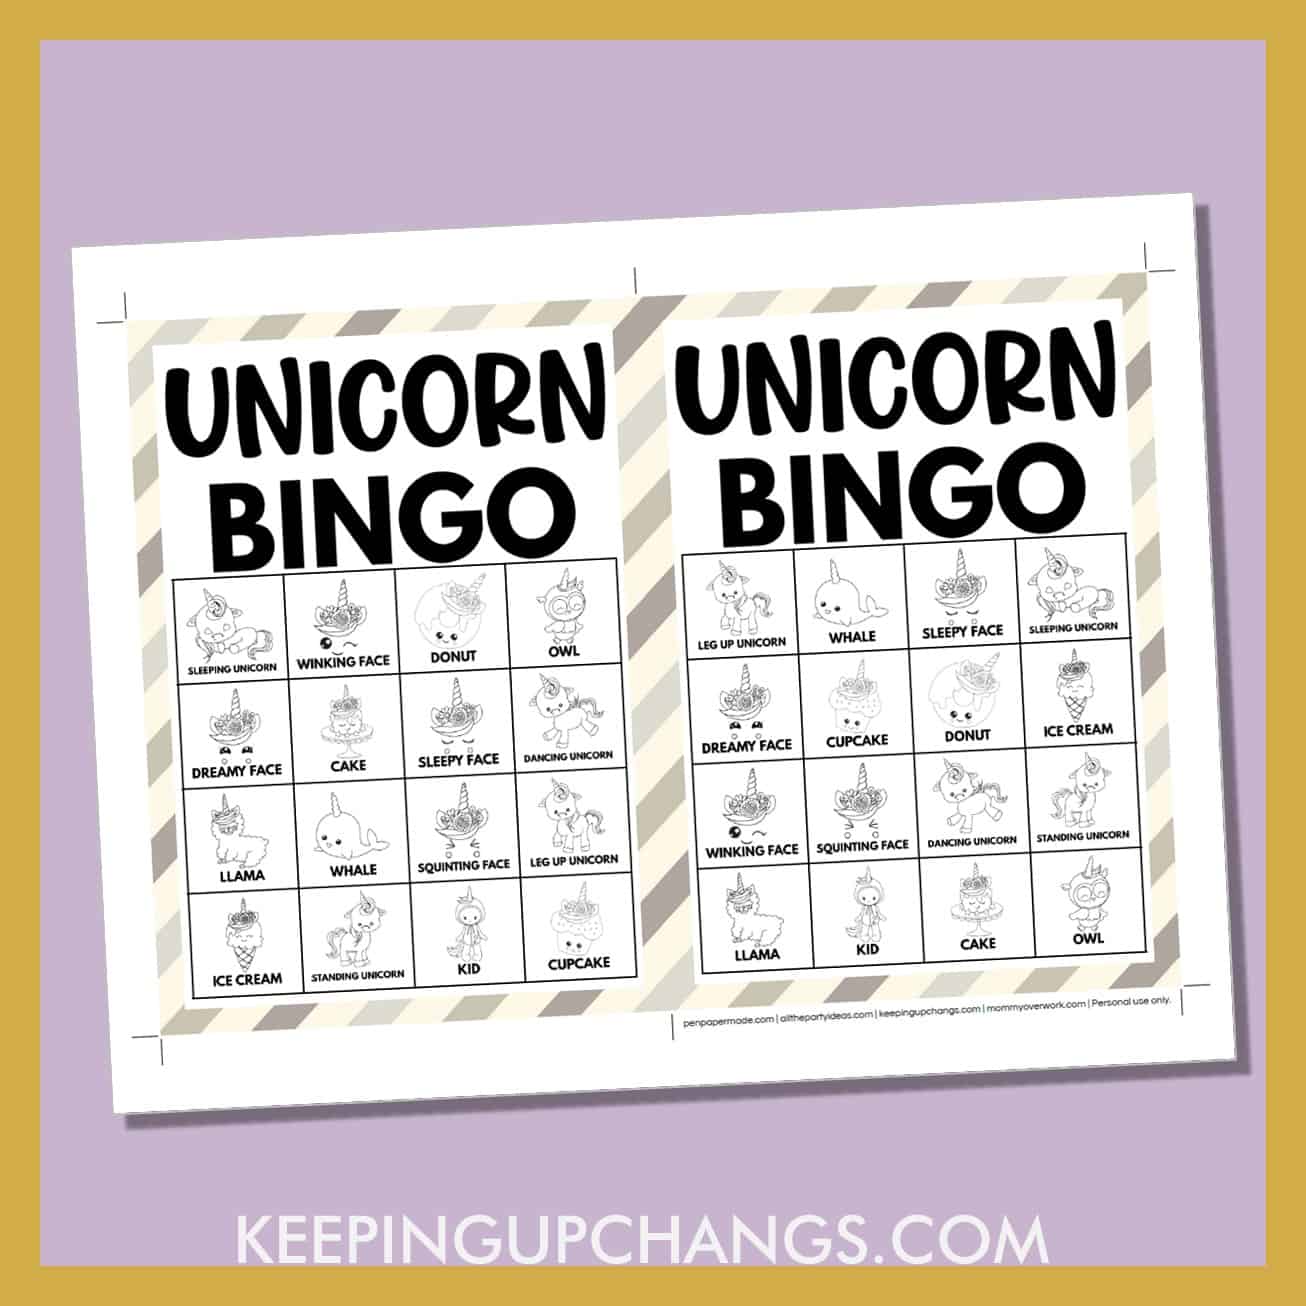 free unicorn bingo card 4x4 5x7 game boards with black, white images and text words.